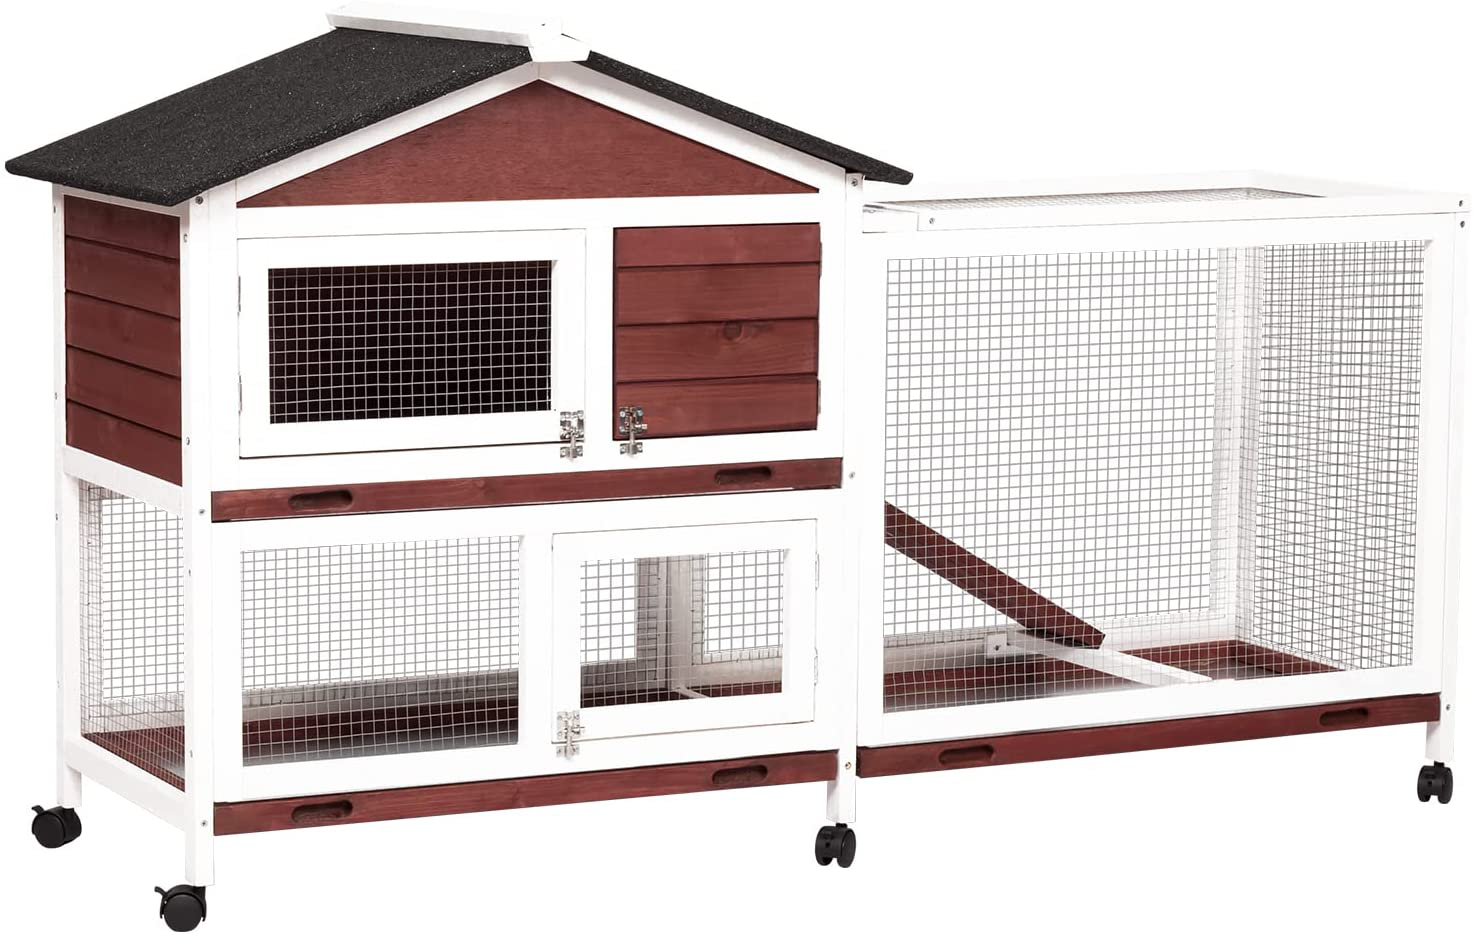 Rabbit Hutch Outdoor Bunny Cage - Large Bunny Hutch with Runs House Small Animal Habitats for Guinea Pigs Hamster Removable Tray Two Tier Waterproof Roof Pet Supplies Cottage Poultry Pen Enclosure Animals & Pet Supplies > Pet Supplies > Small Animal Supplies > Small Animal Habitats & Cages Kinpaw Style 3  